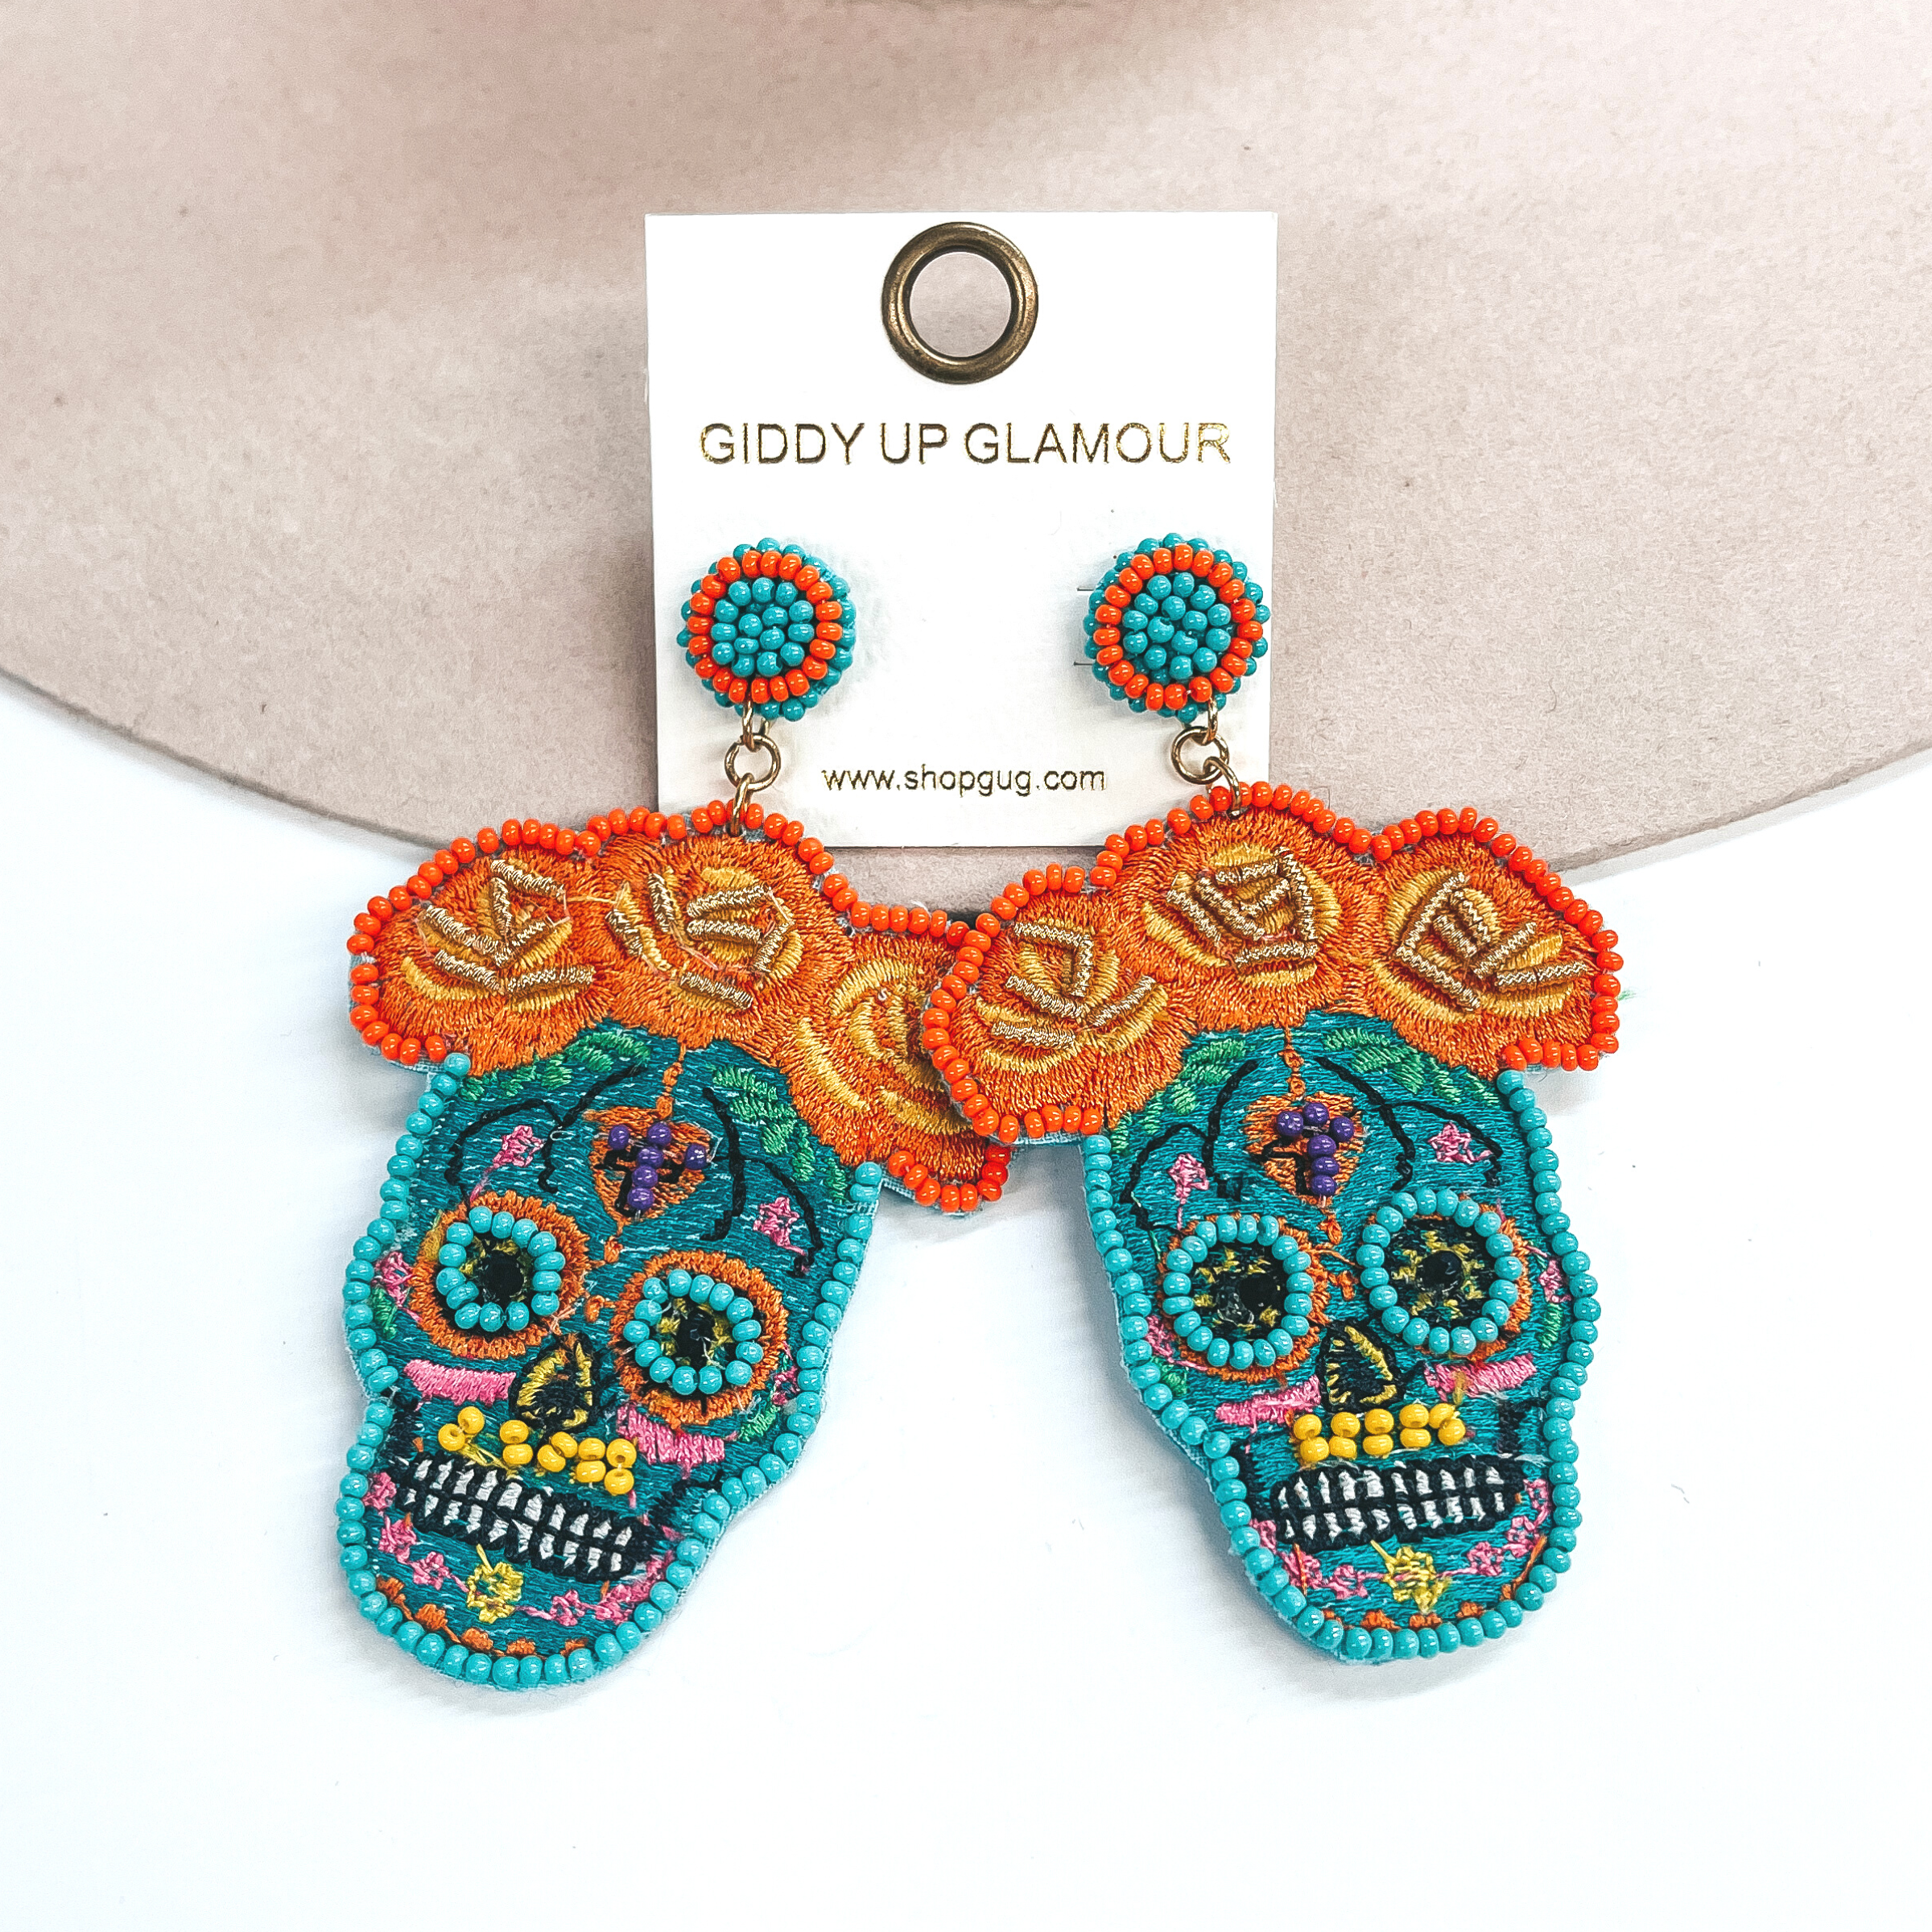 These are sugar skull post earrings in turquoise and other colors. There are orange  flowers in the top with beads and stitching. The skull part has turquoise beads  around the eyes, yellow beads in the mouth, and black beads in the eyes.  The rest has multicolored stitching all around. These earrings are taken on  a beige hat brim and on a white background.